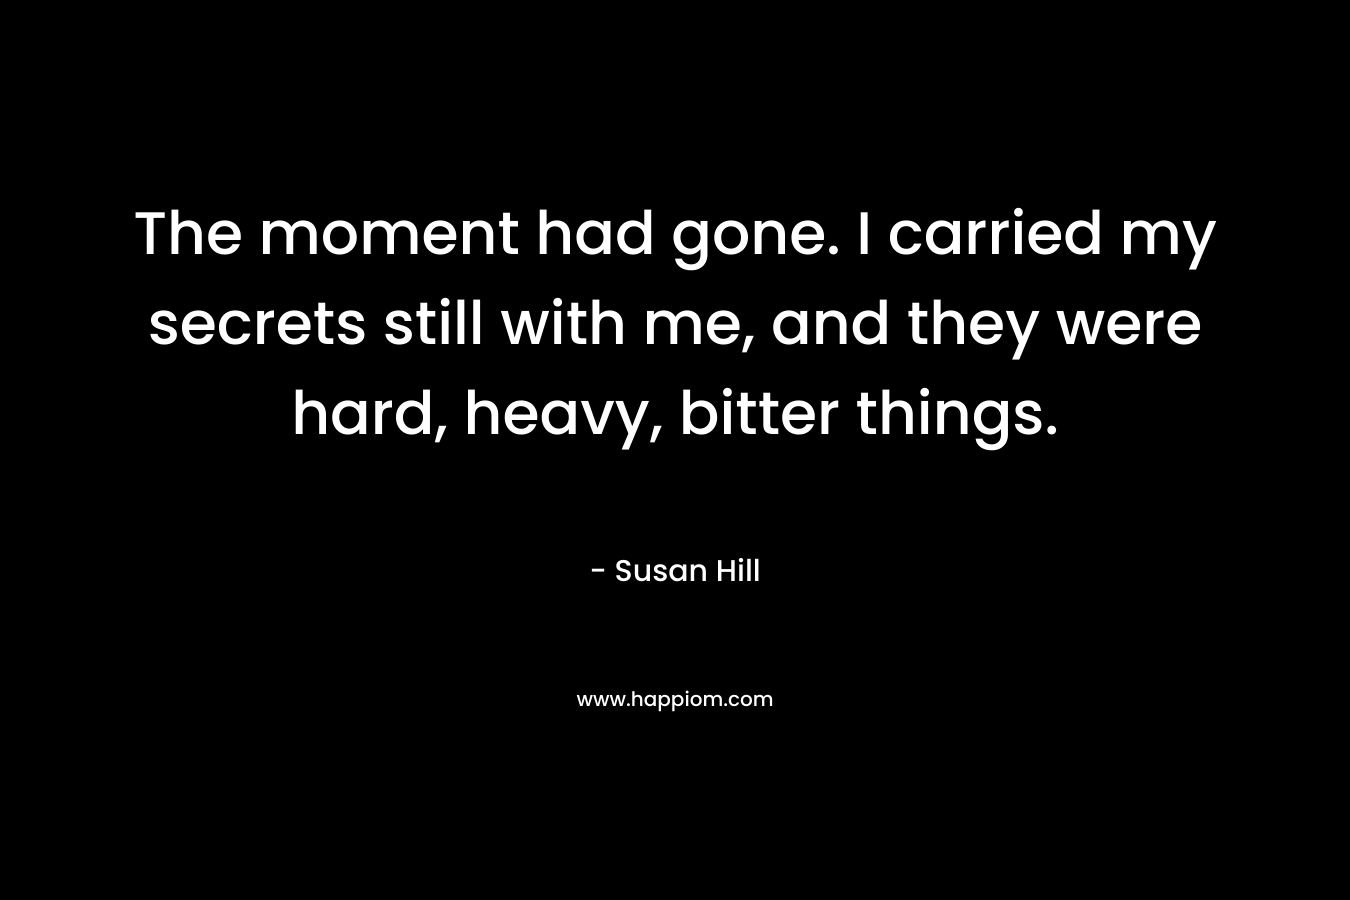 The moment had gone. I carried my secrets still with me, and they were hard, heavy, bitter things. – Susan Hill